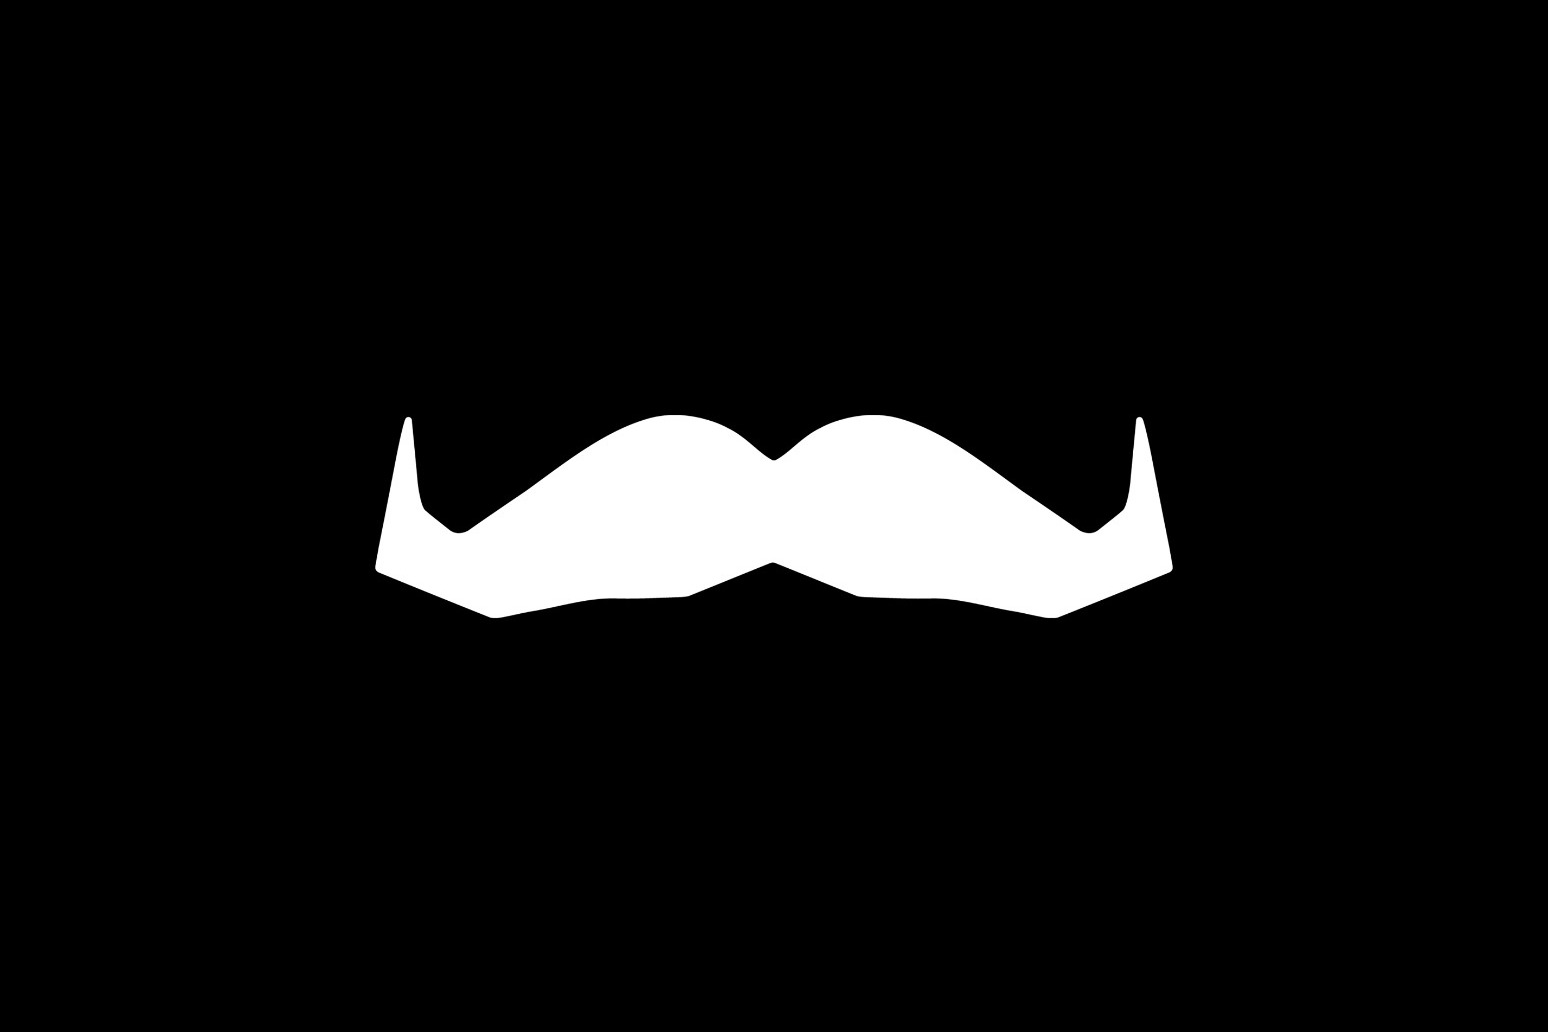 Movember returns with hopes for even more conversations about mental health 